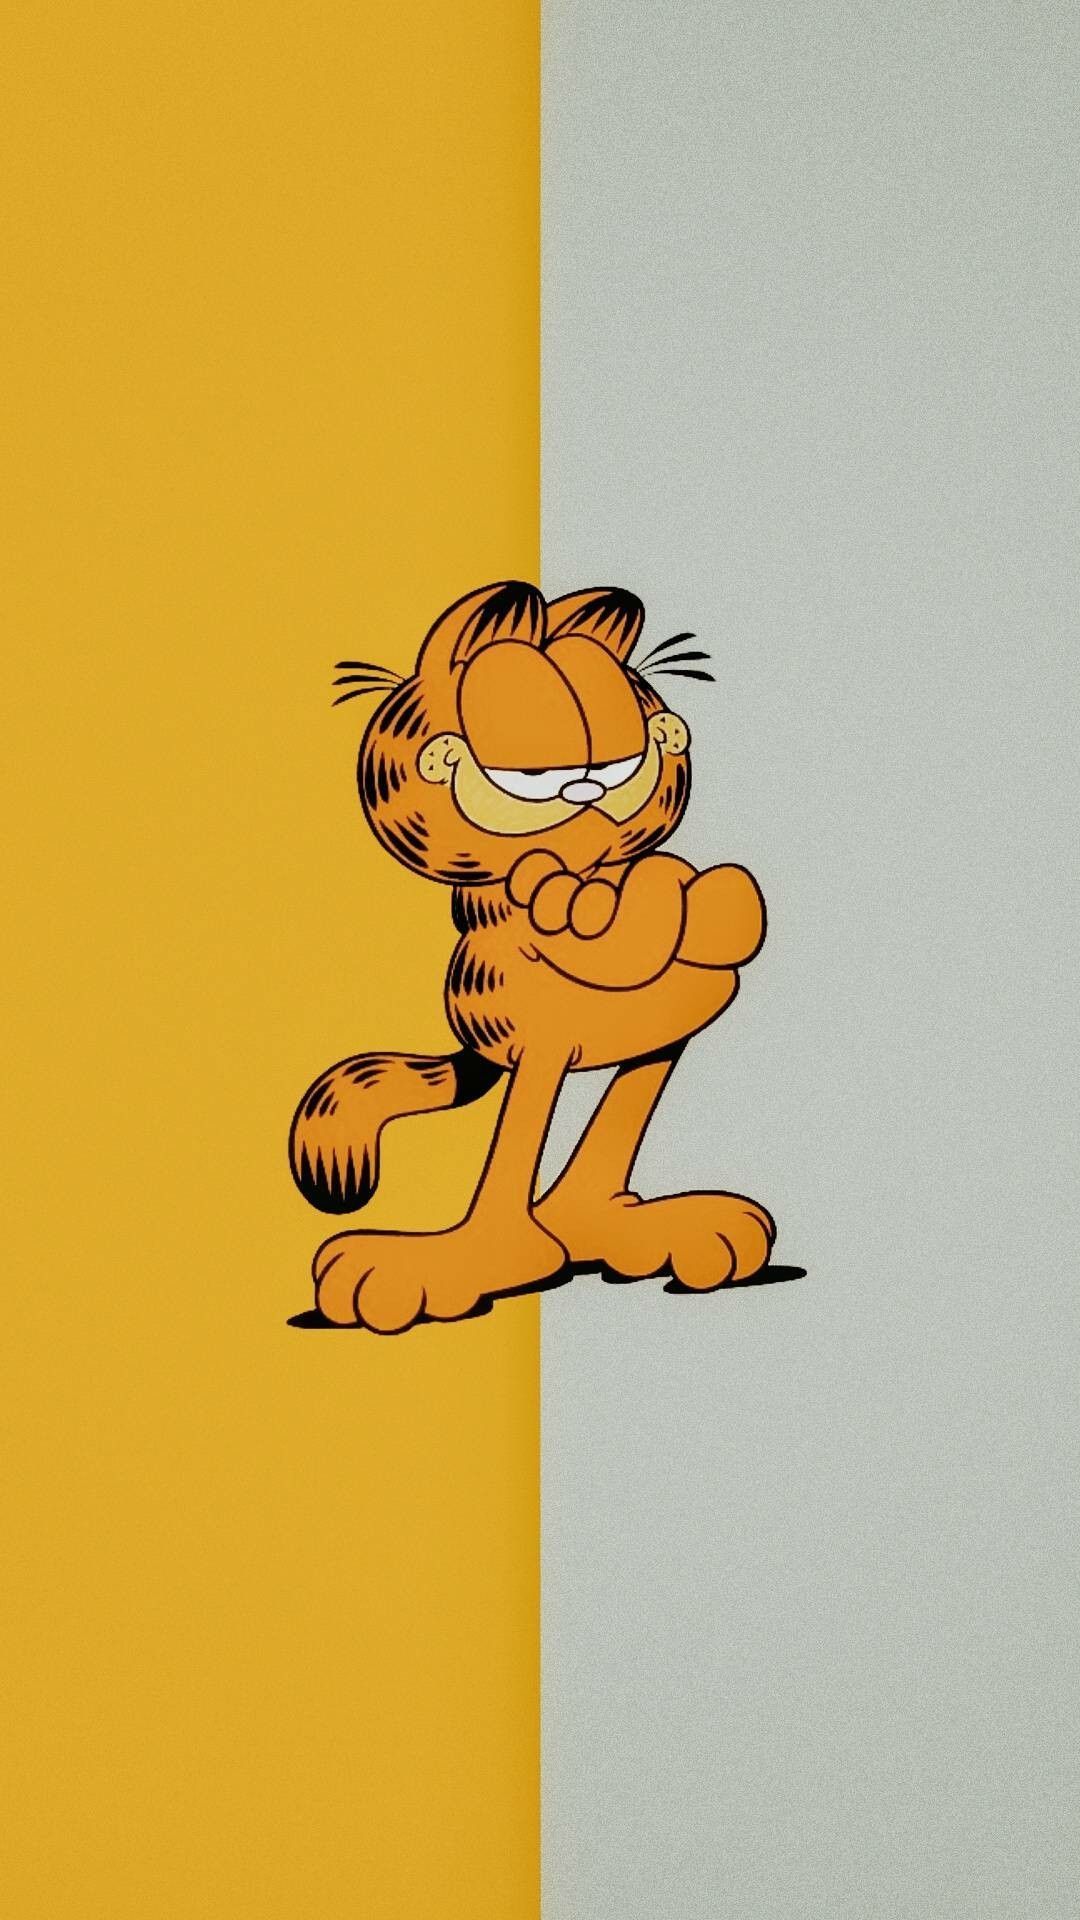 Most Latest Simple Anime Wallpaper IPhone Garfield wallpaper. Garfield wallpaper, Anime wallpaper iphone, Cartoon wallpaper